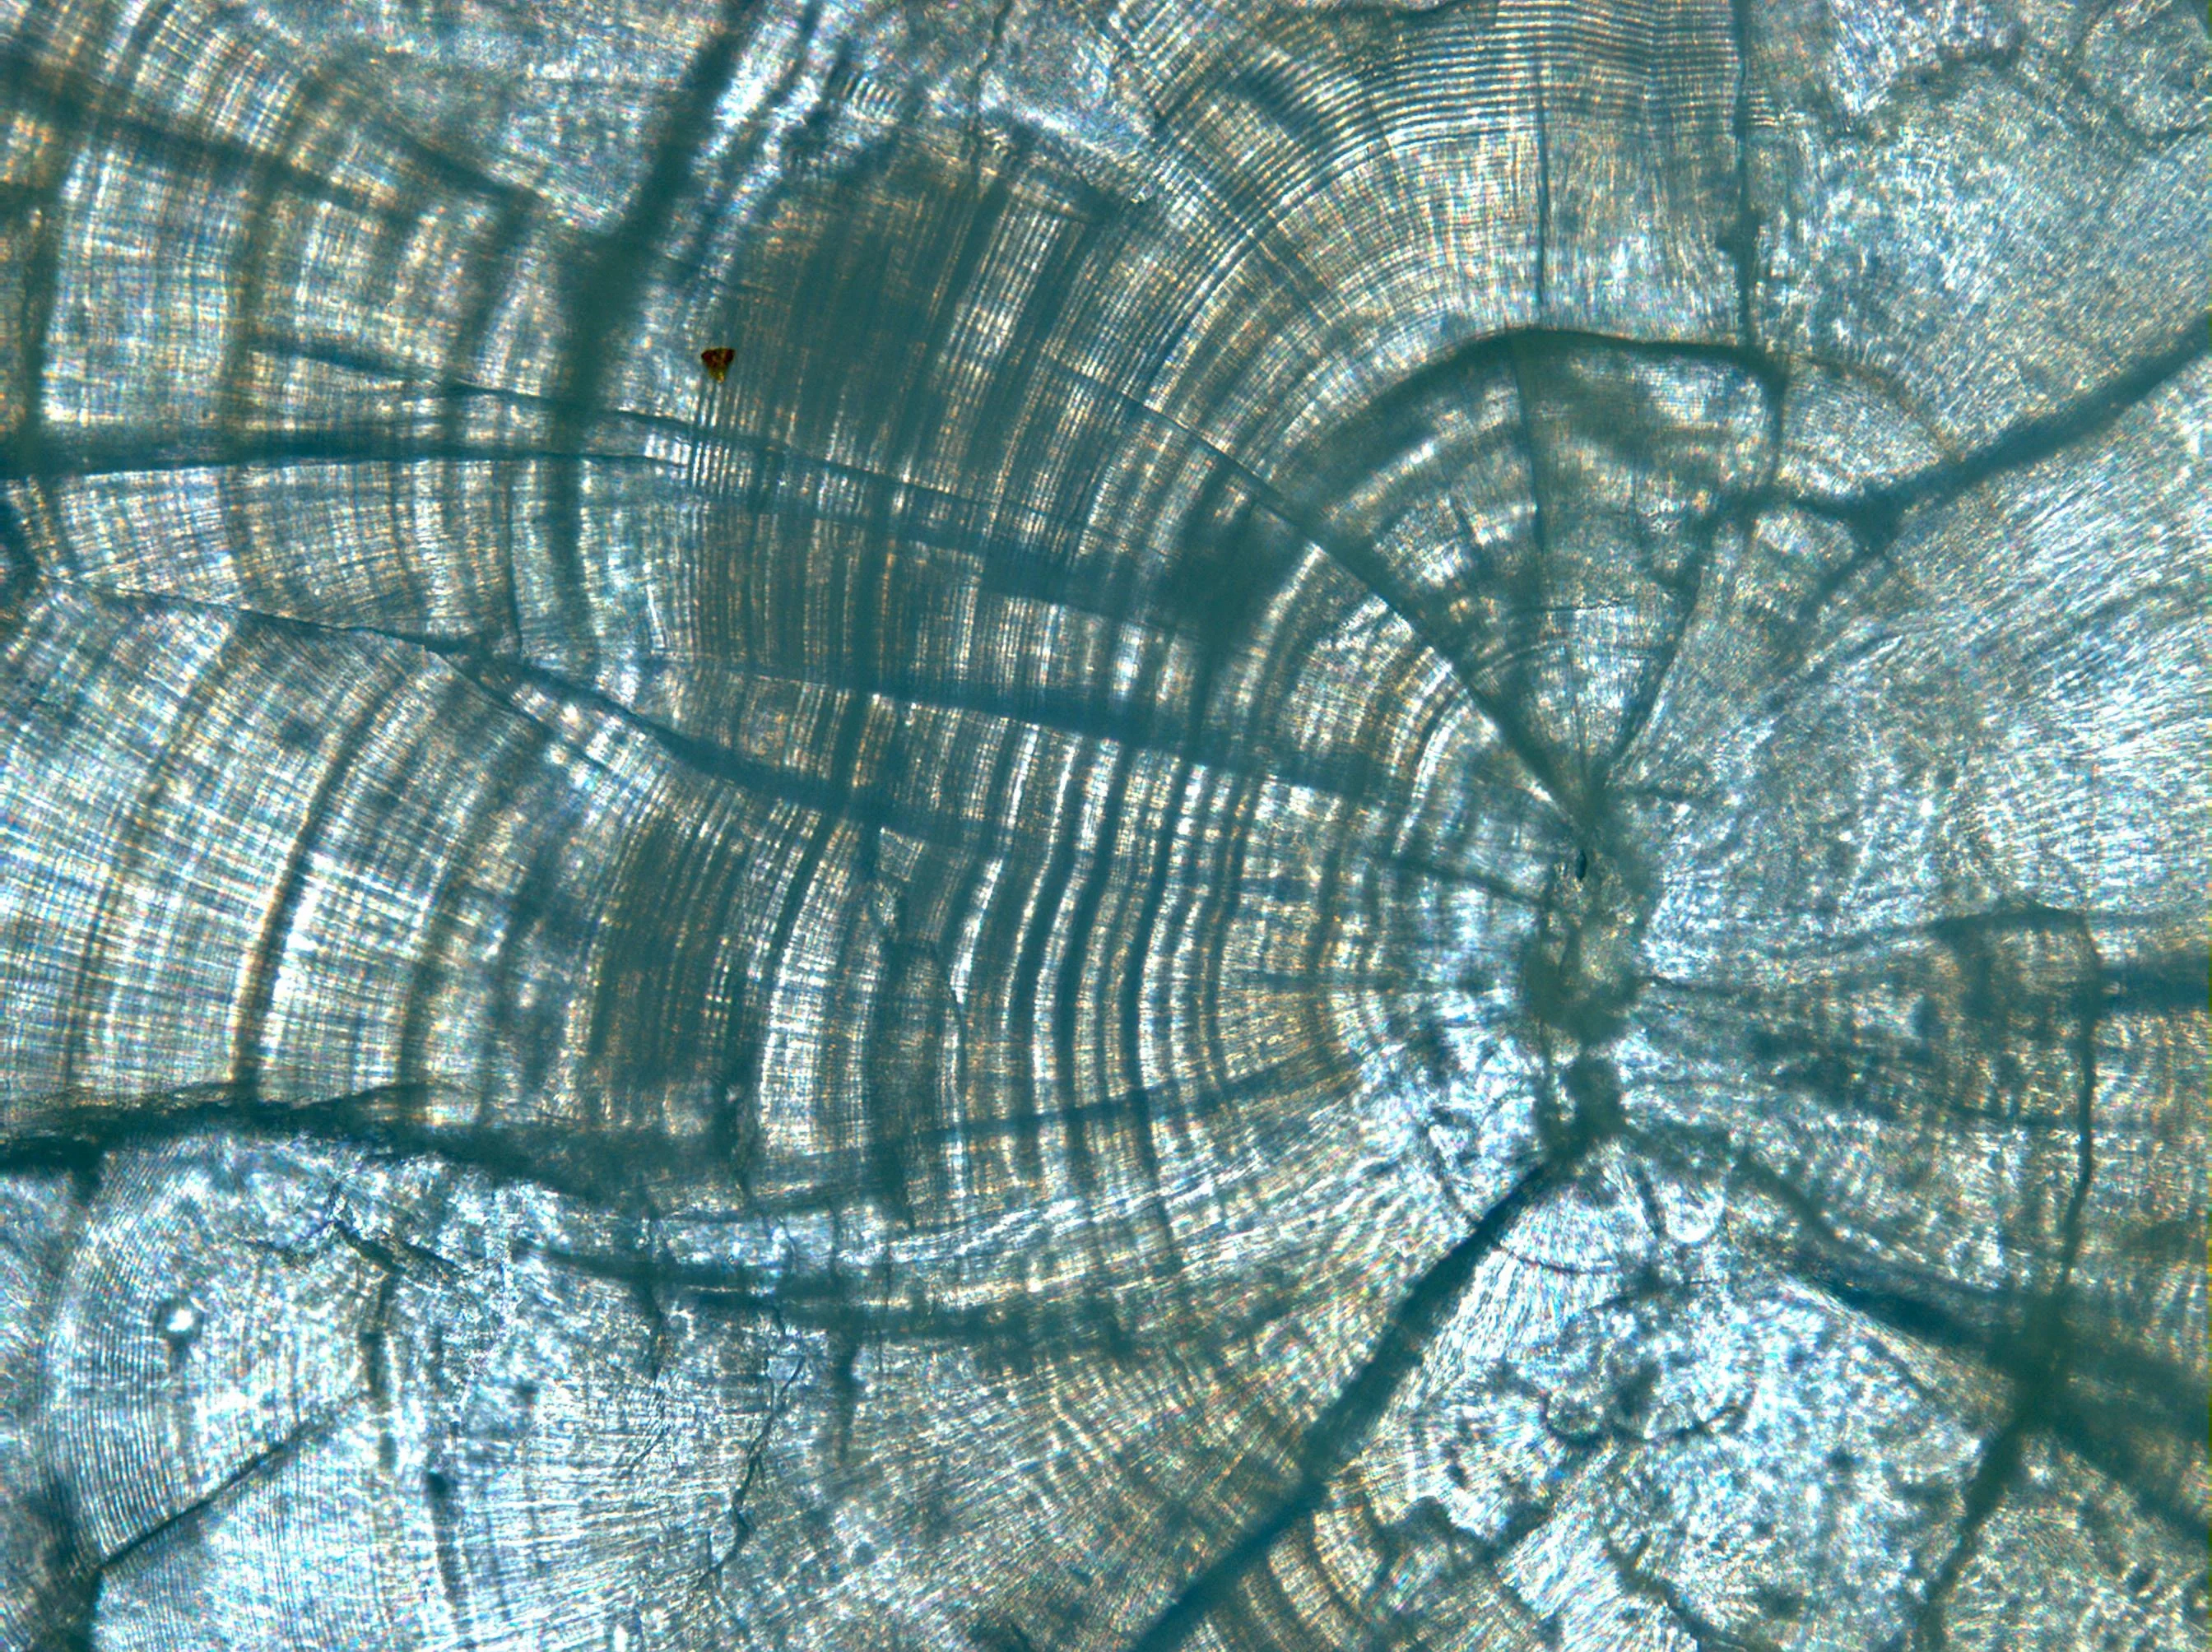 microscopic view of an otolith